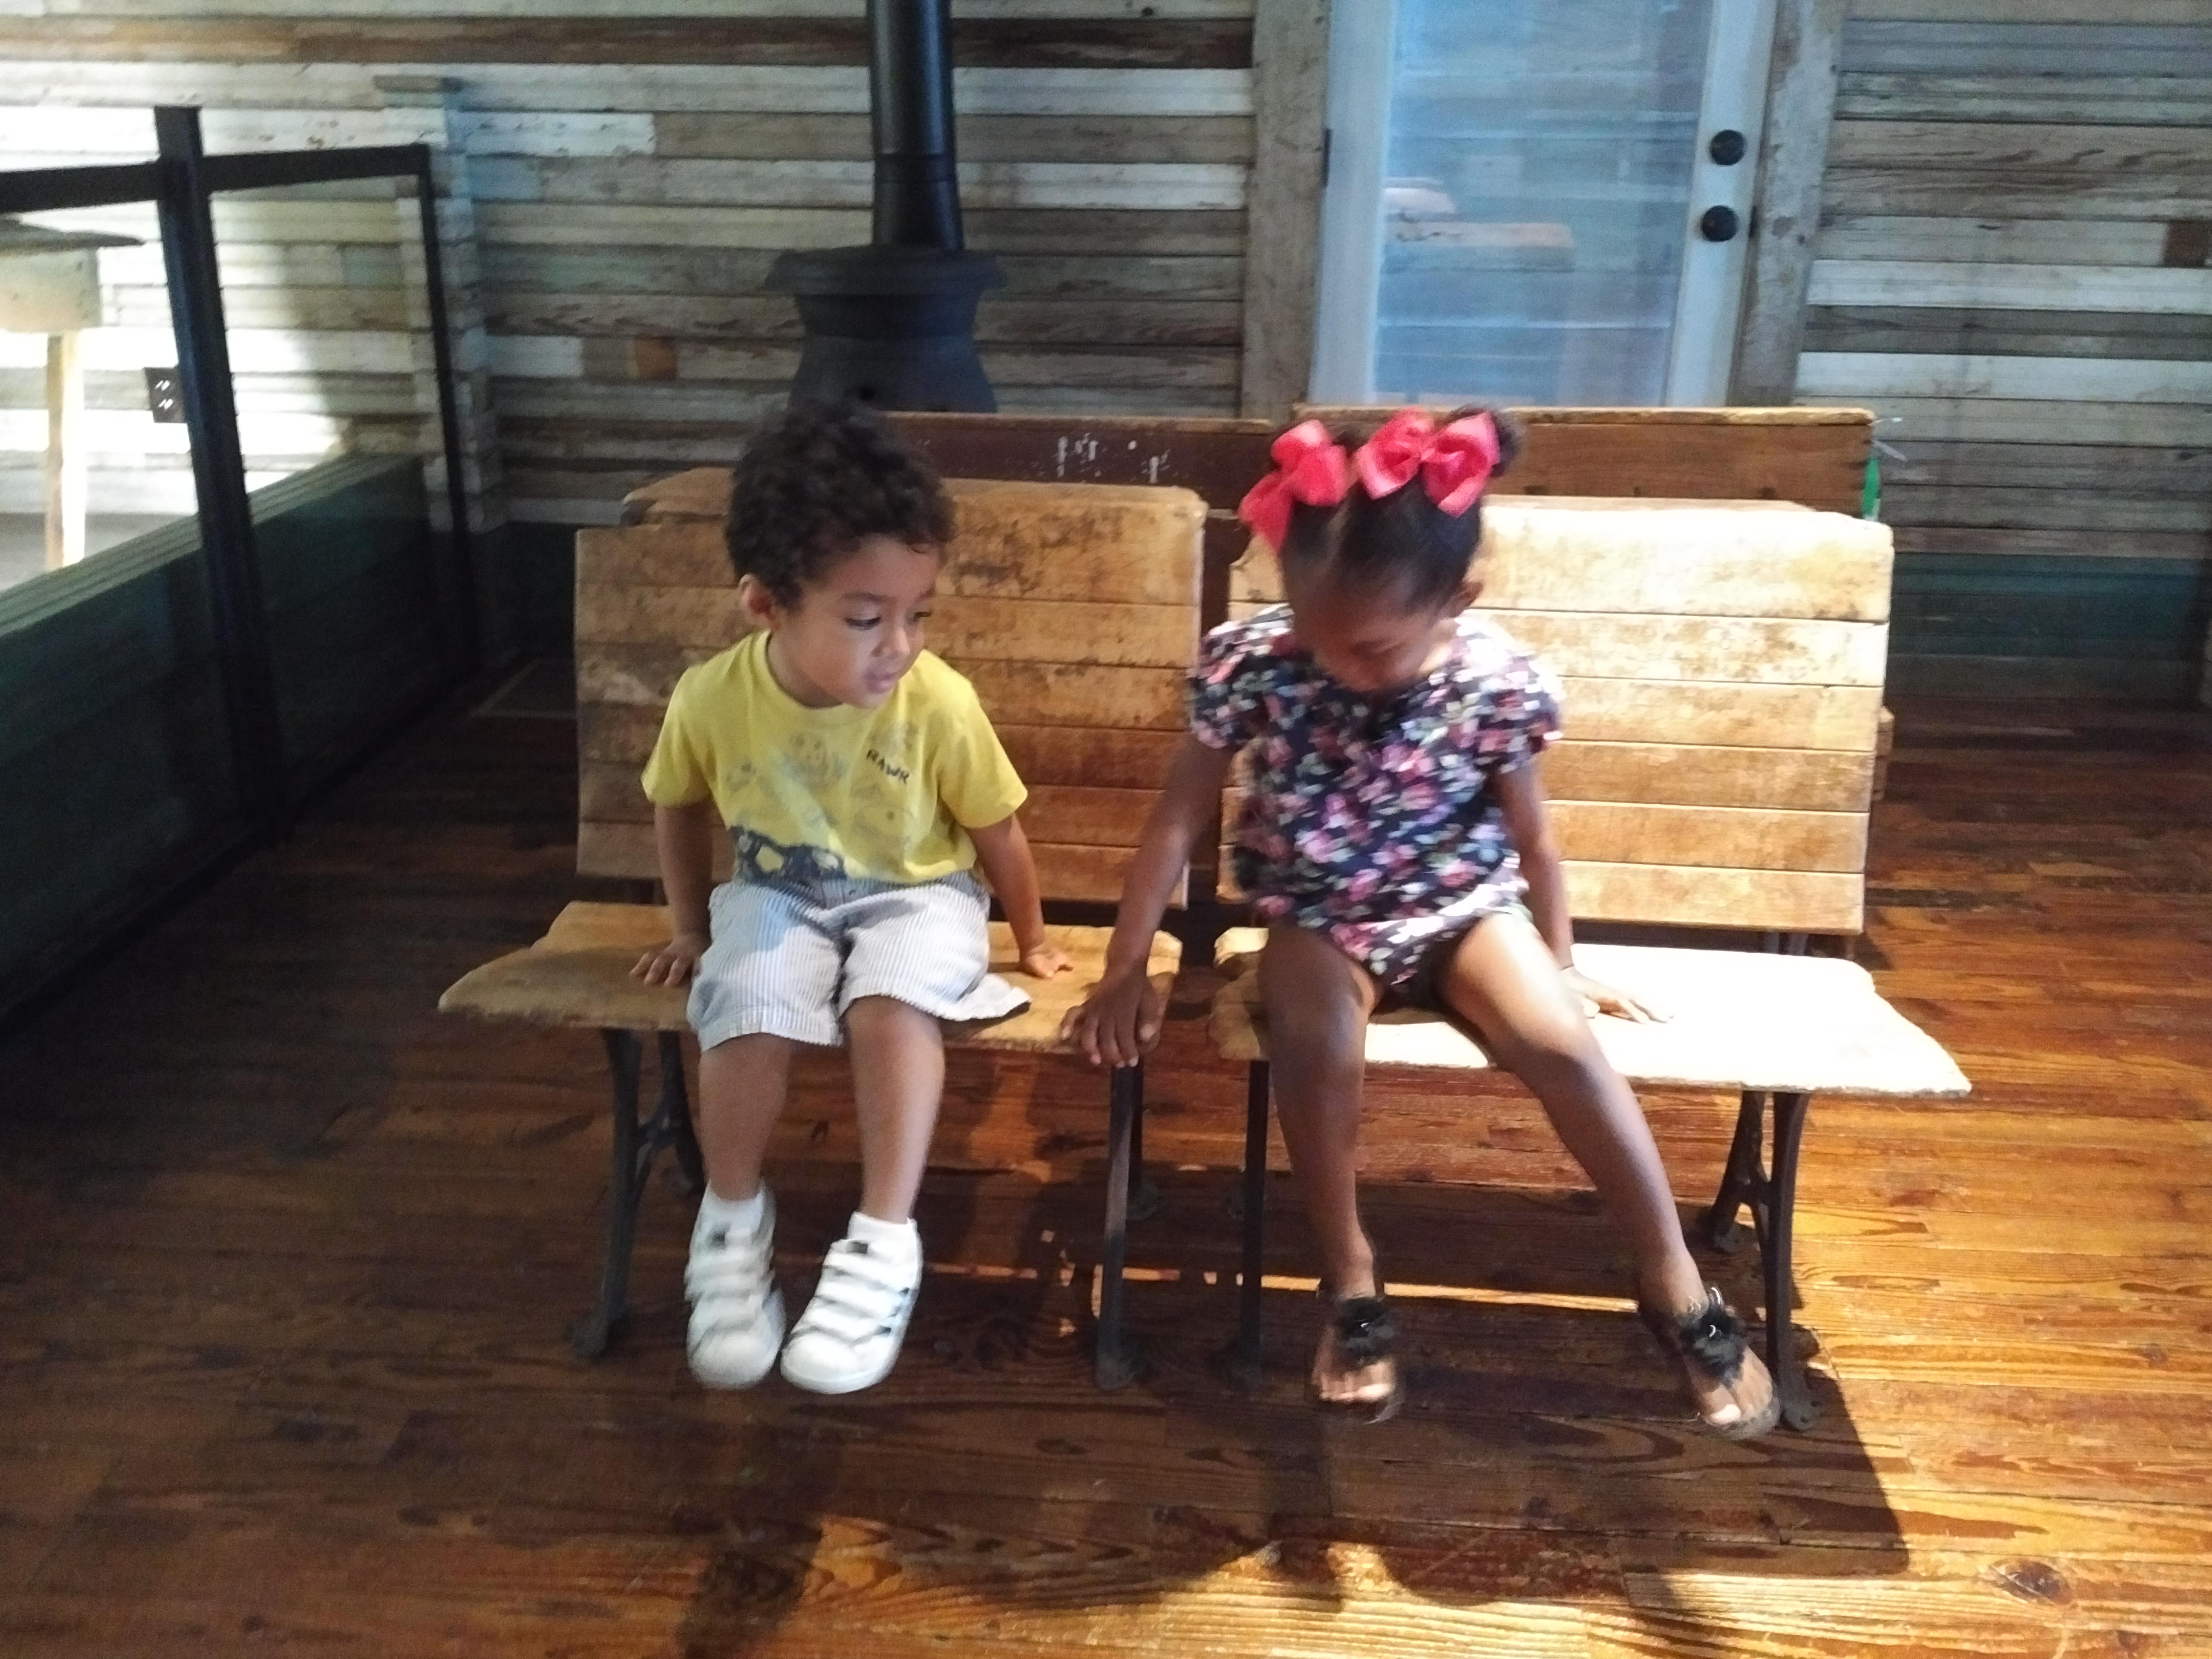 2018 TN Brownsville Delta Heritage Center - Tina Turner Museum schoolhouse benches kids